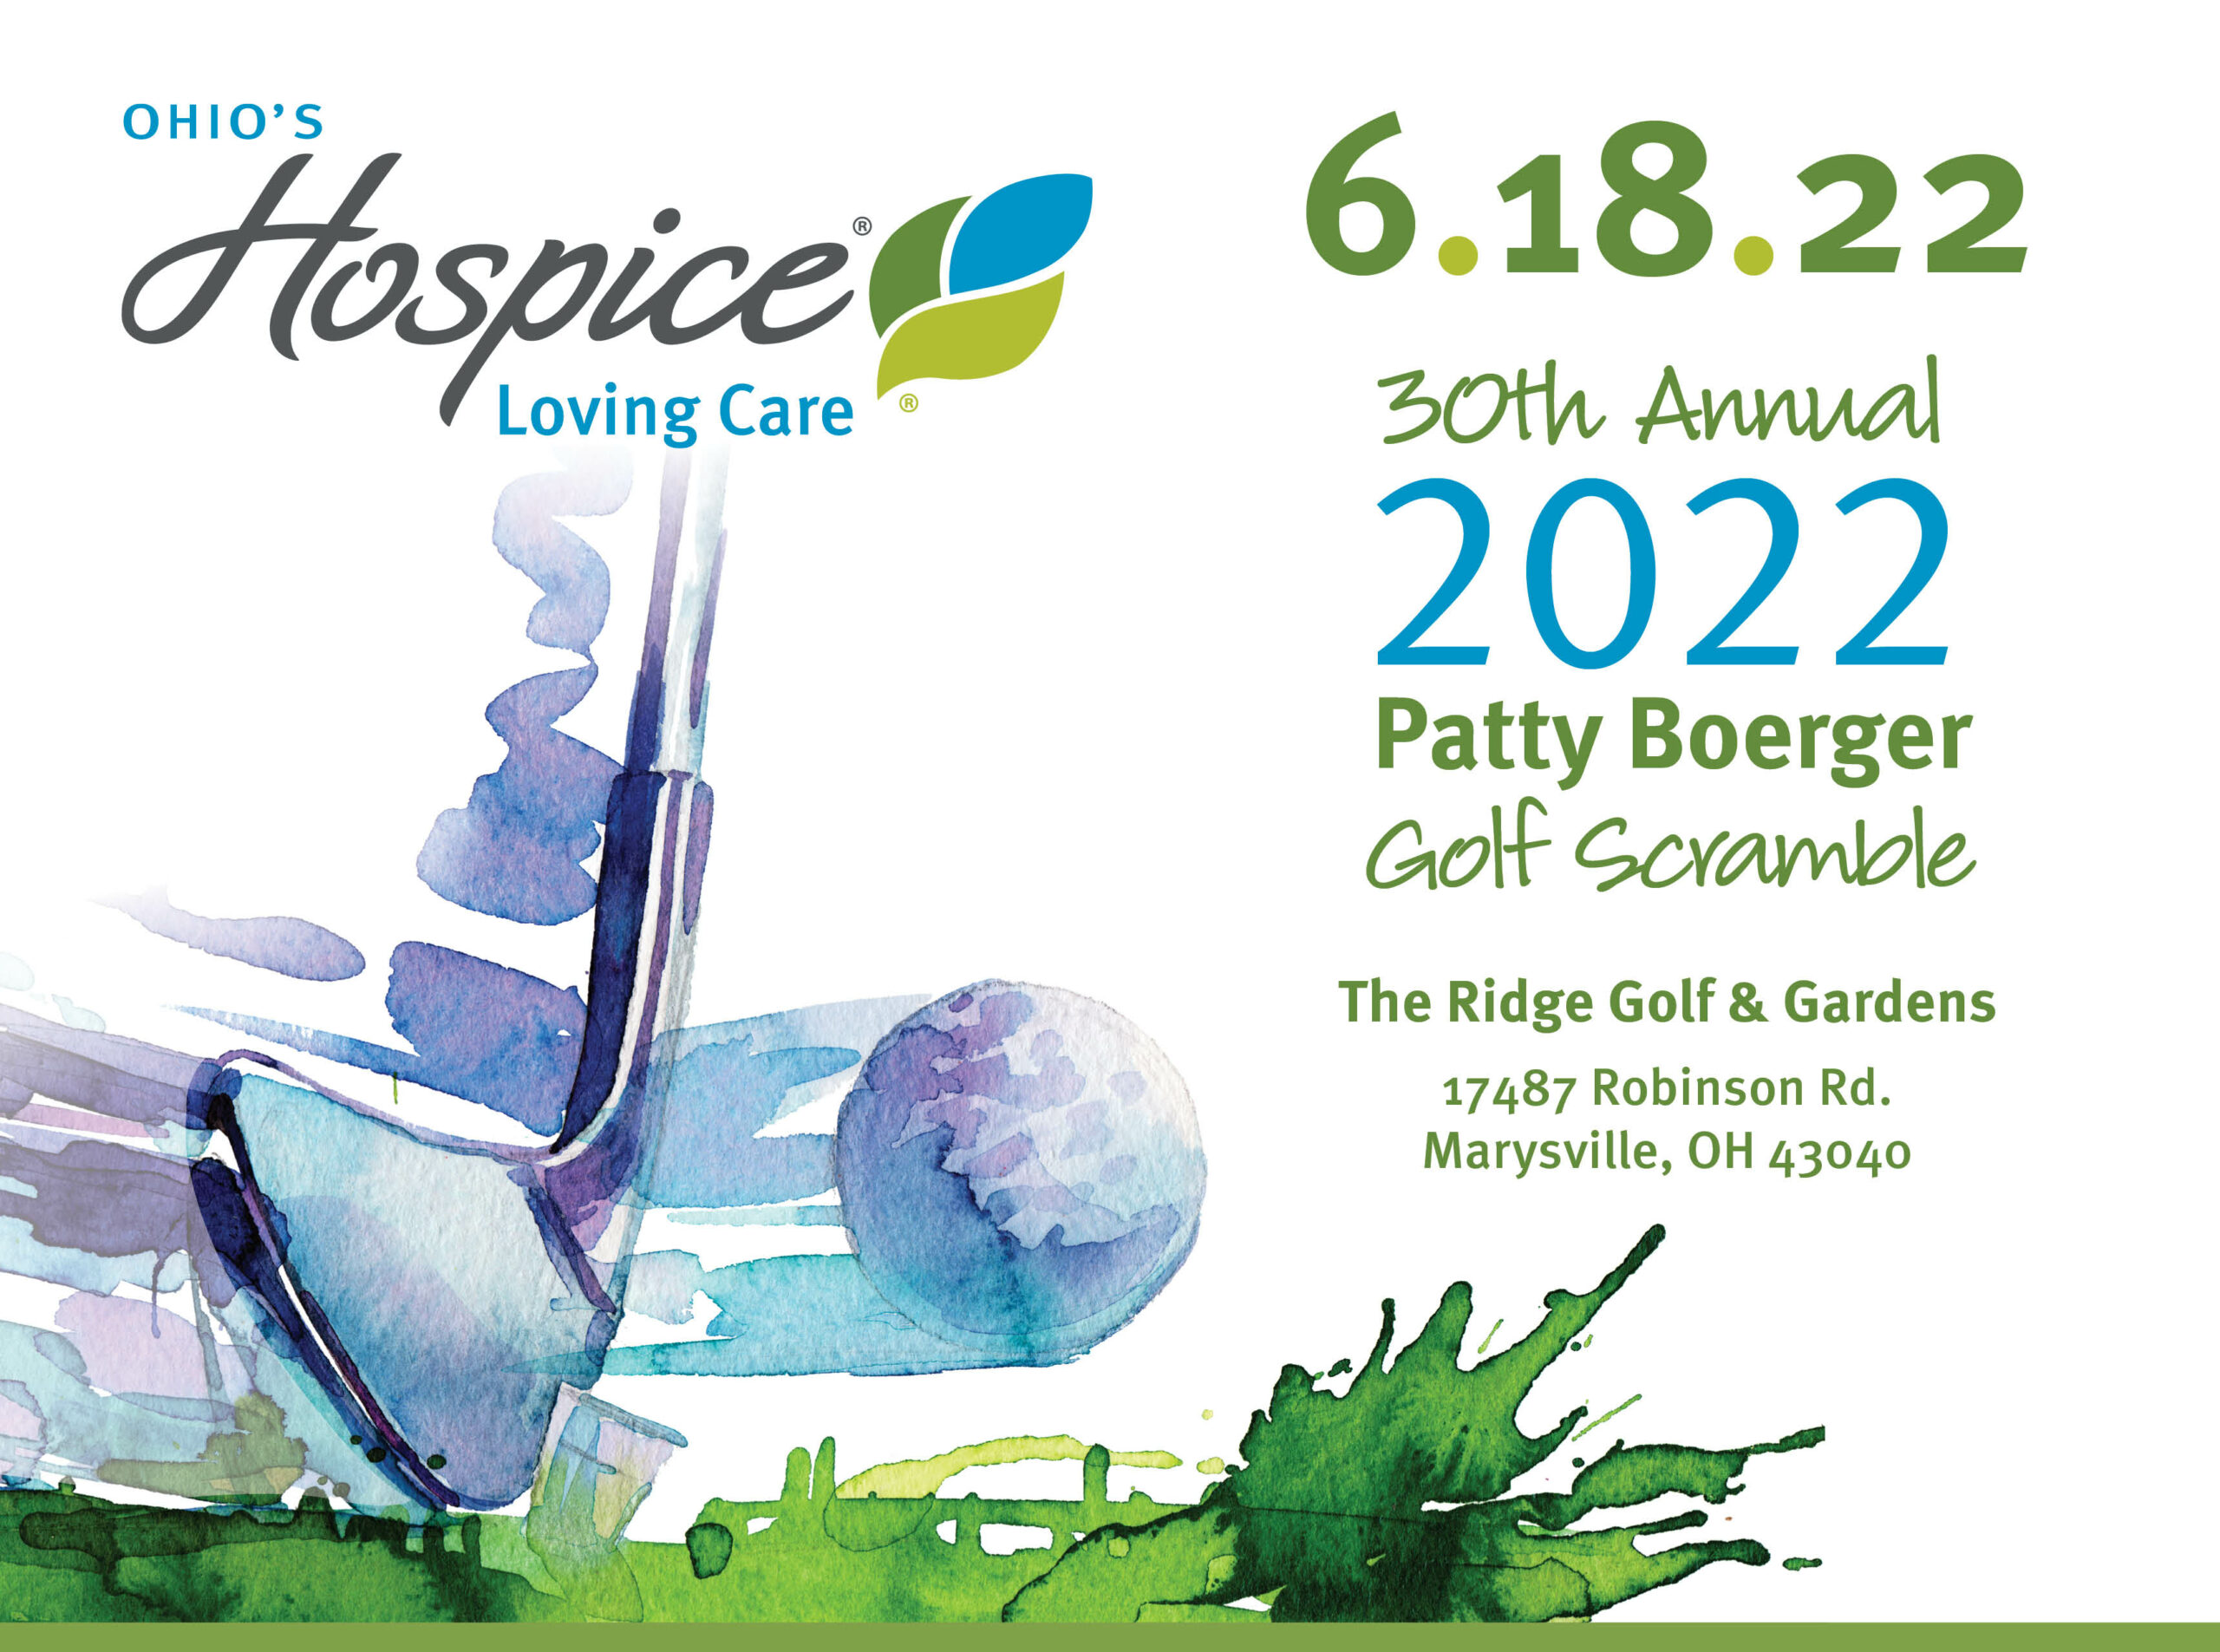 Patty Boerger Golf Scramble to be held June 18, 2022